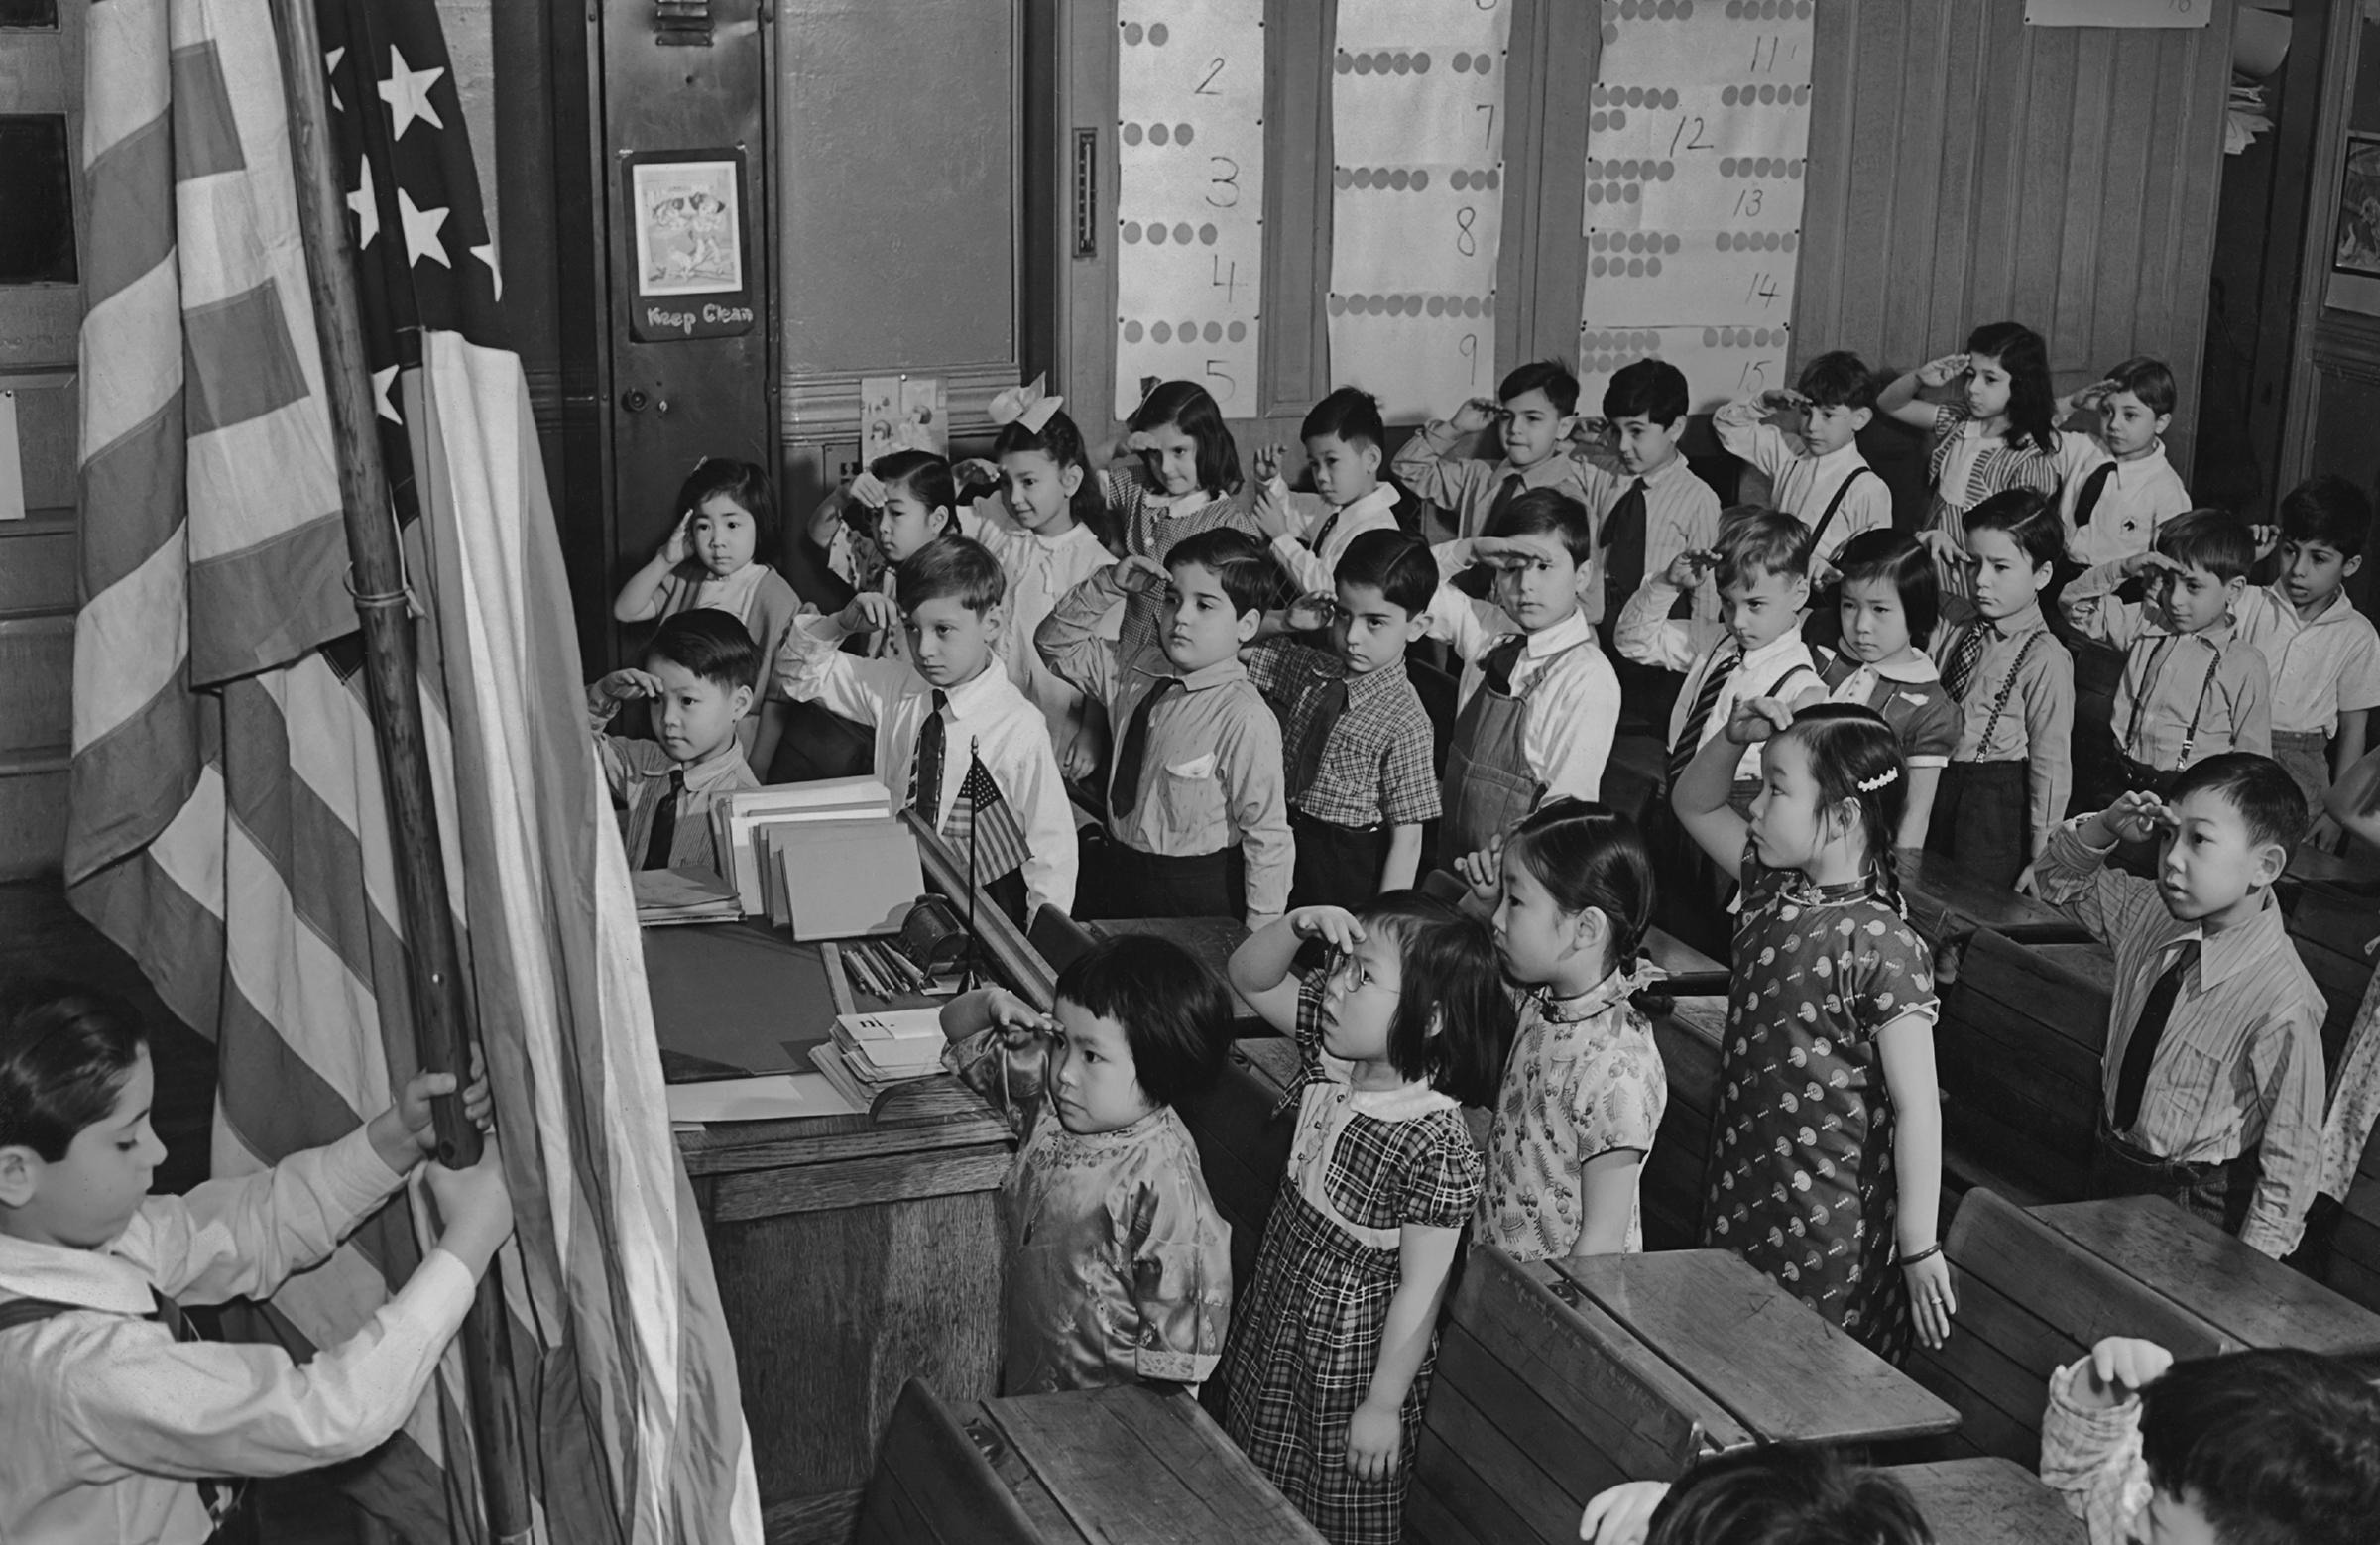 A group of children saluting the American flag at a school in the Chinatown area of Manhattan circa 1960. (Keystone View/FPG/Getty Images)